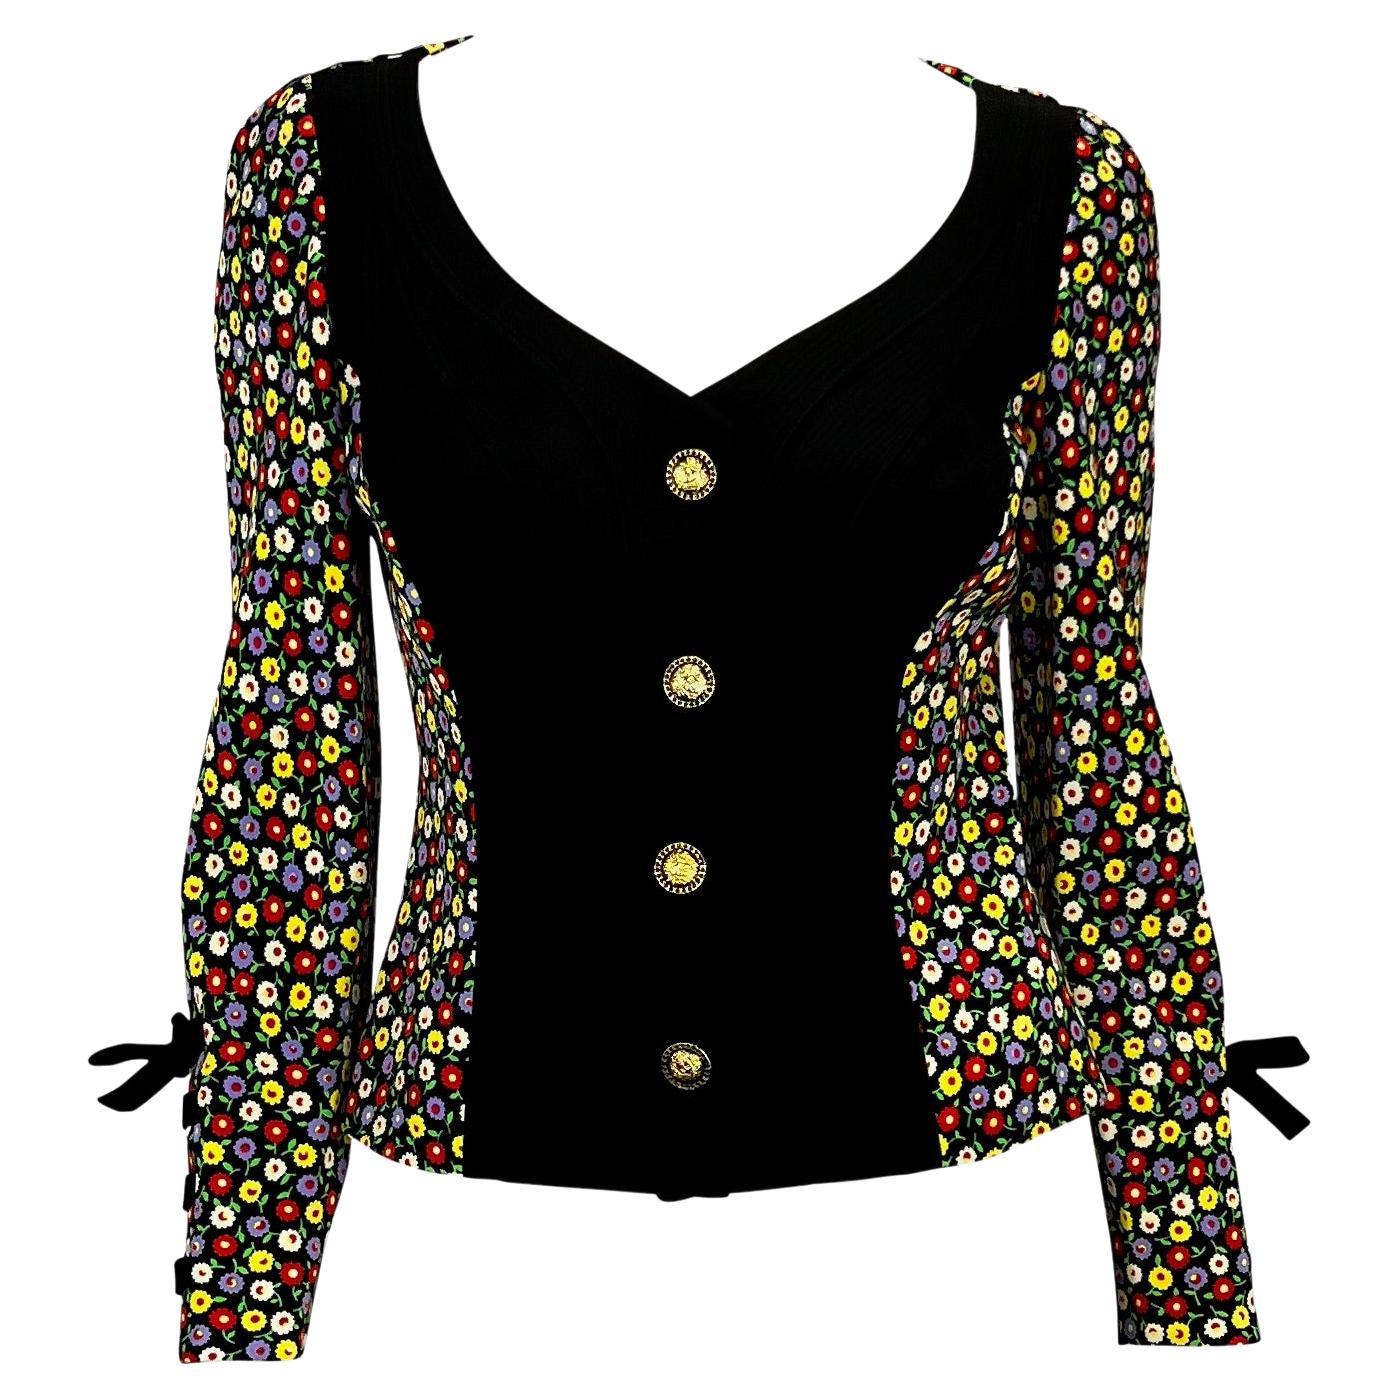 S/S 1993 Gianni Versace Couture Runway Floral Bustier Ribbon Blazer Jacket For Sale